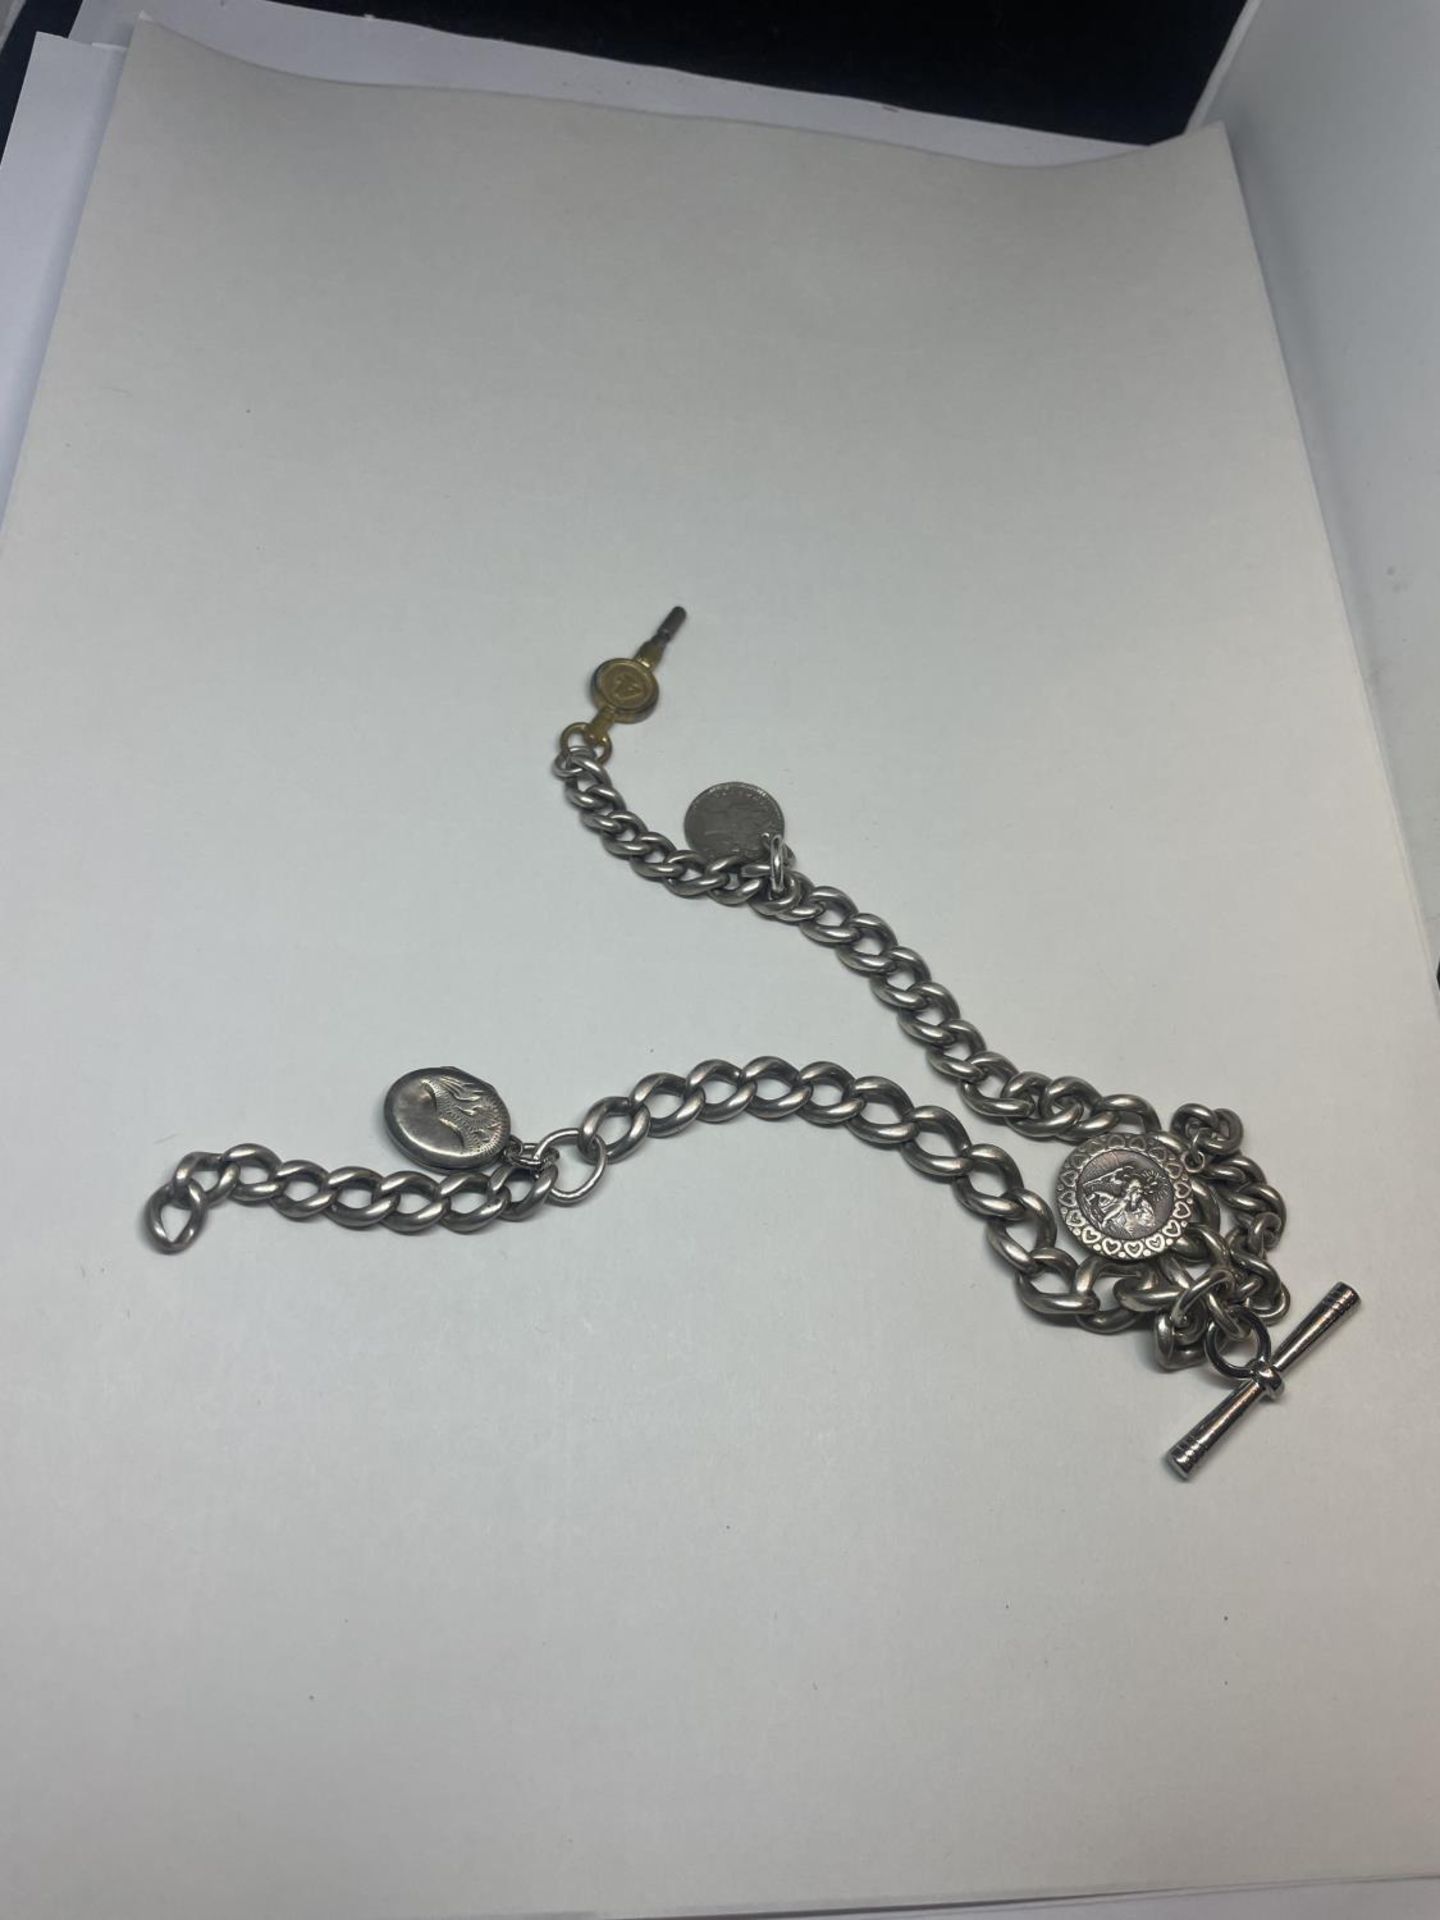 A SILVER DOUBLE ALBERT WATCH CHAIN WITH THREE FOBS AND A KEY - Image 3 of 4